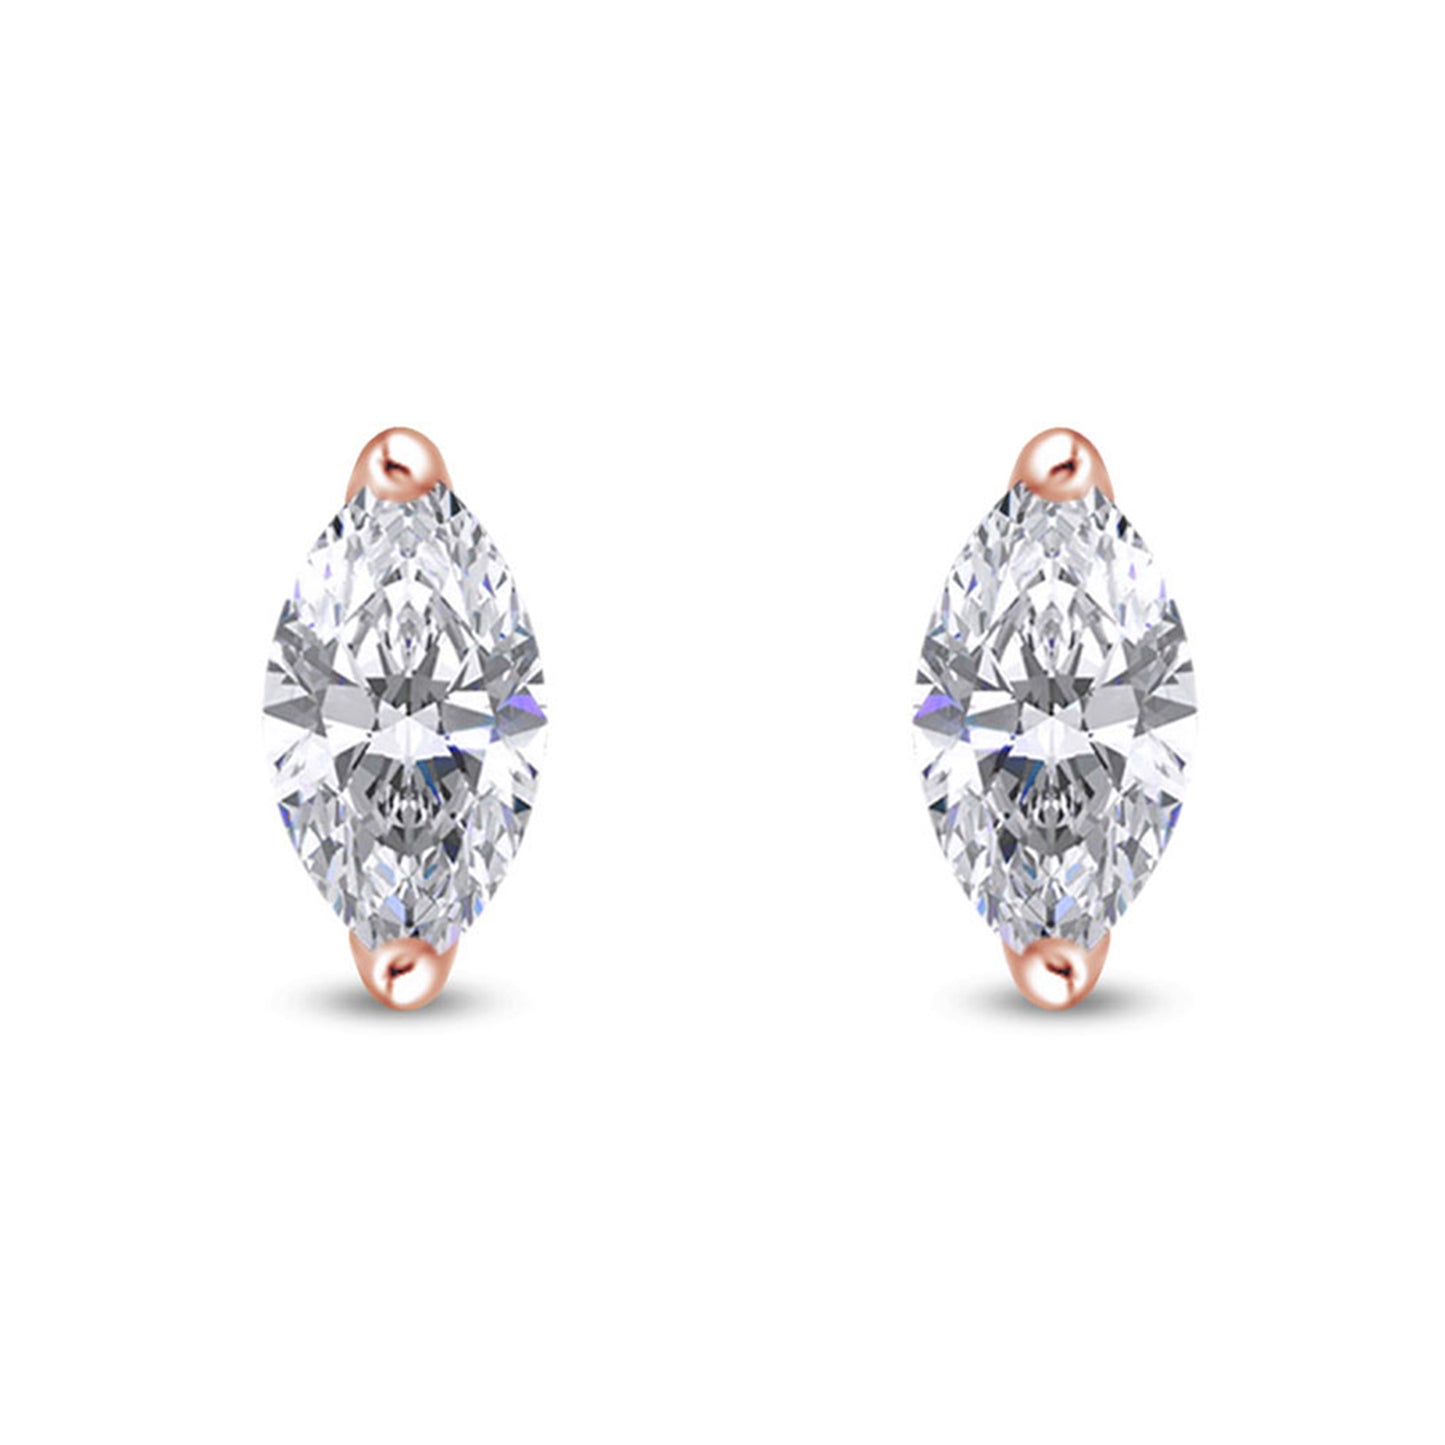 Load image into Gallery viewer, Sparkling White Cubic Zirconia Marquise Frame Stud Earrings in 14k Gold Over Sterling Silver Gift For Her
